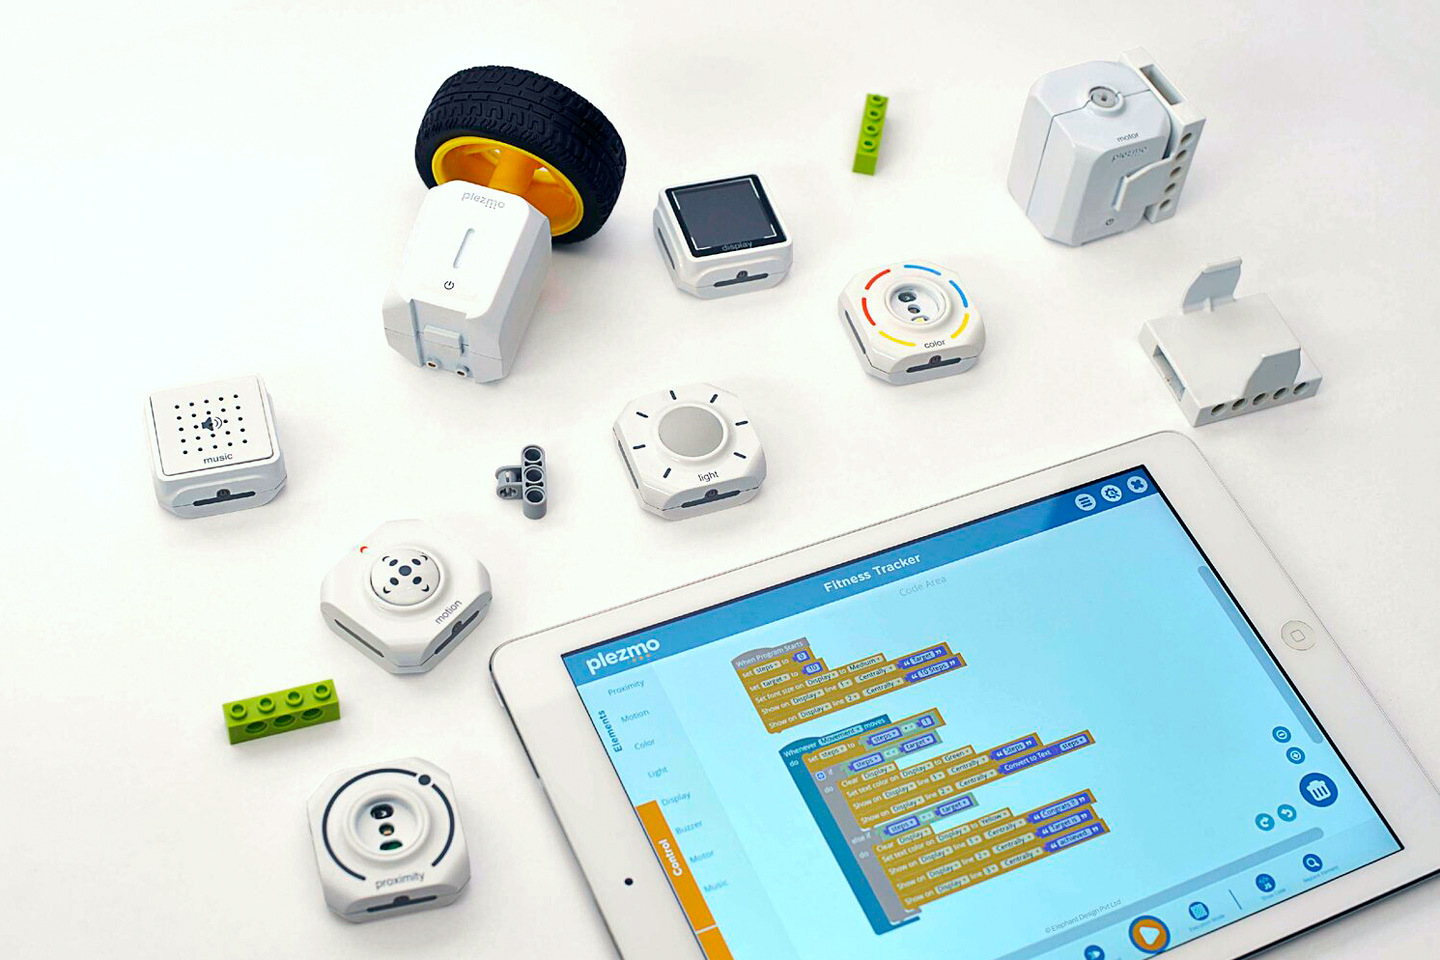 #Plezmo is an Award-winning Modular IoT toy that introduces kids to the fundamentals of coding